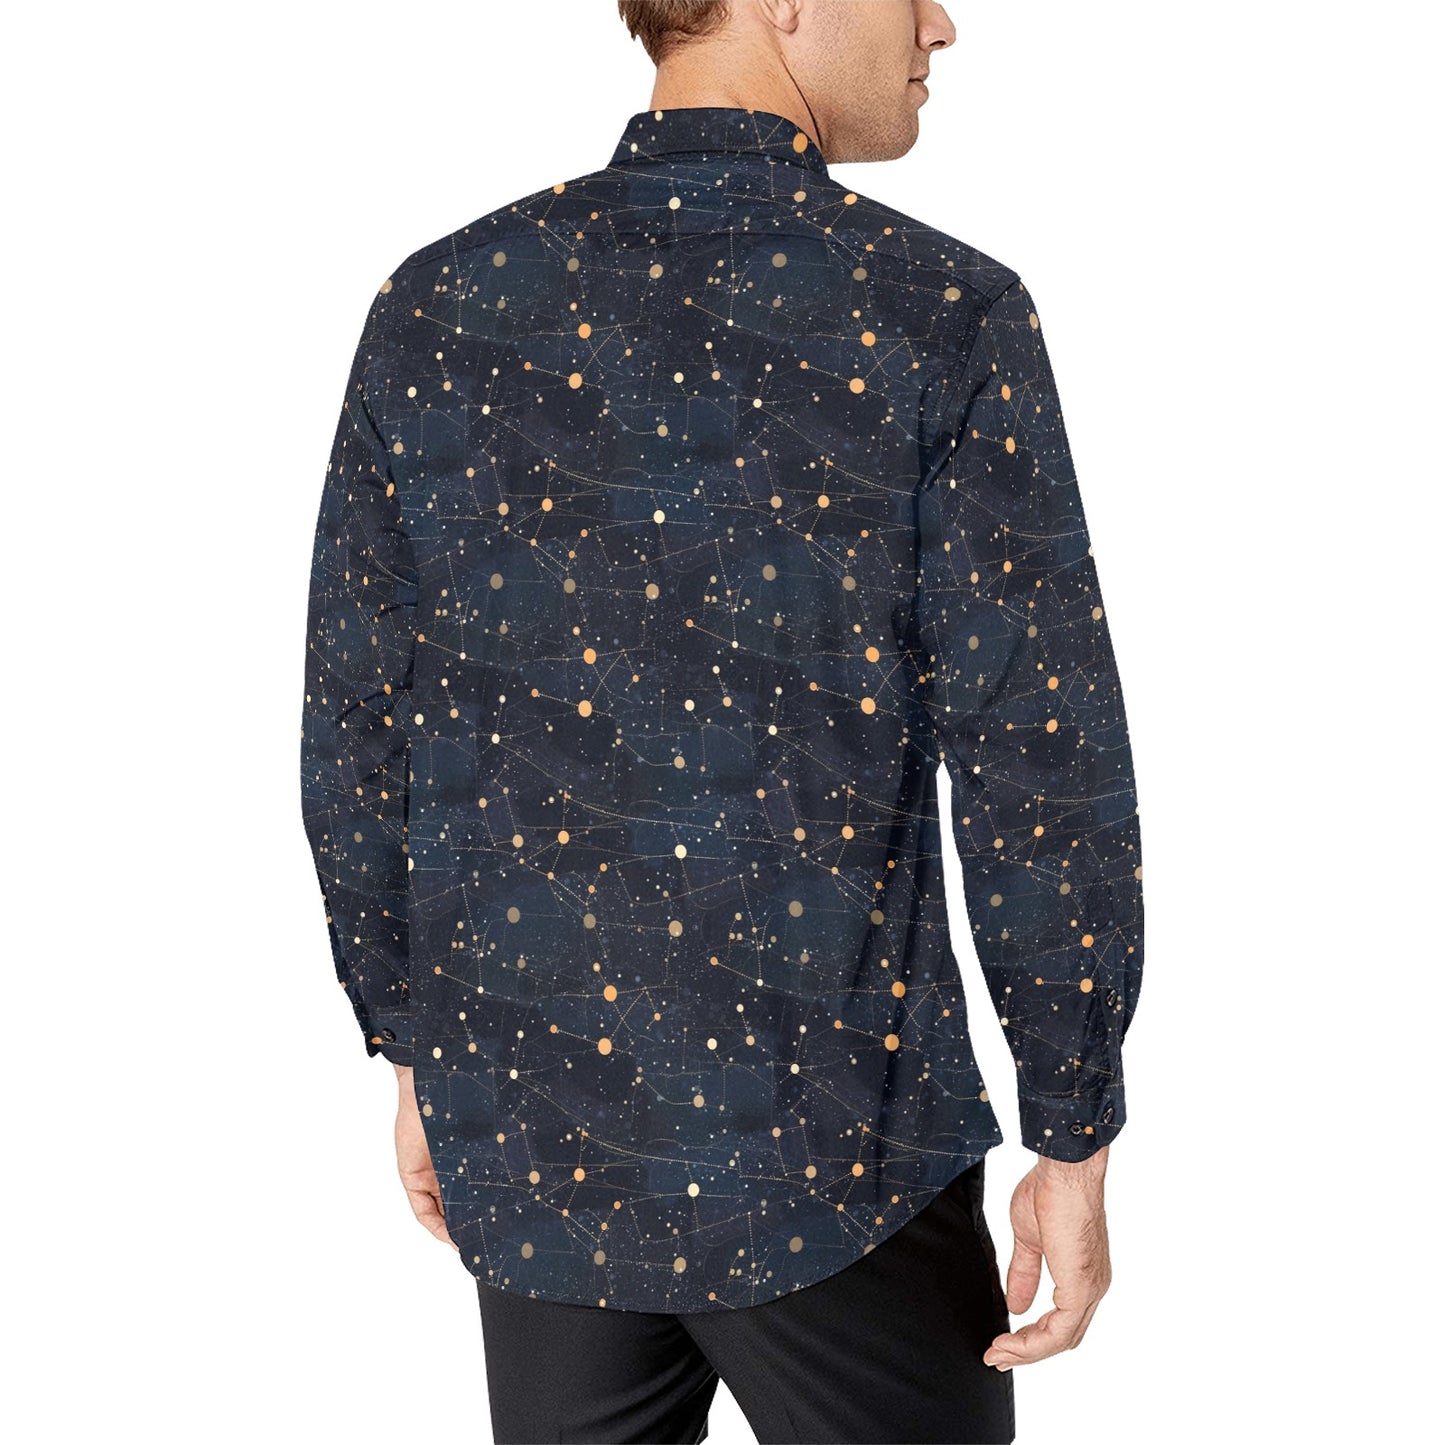 Constellation Space Long Sleeve Men Button Up Shirt, Universe Stars Print Dress Buttoned Collared Casual Dress Shirt with Chest Pocket